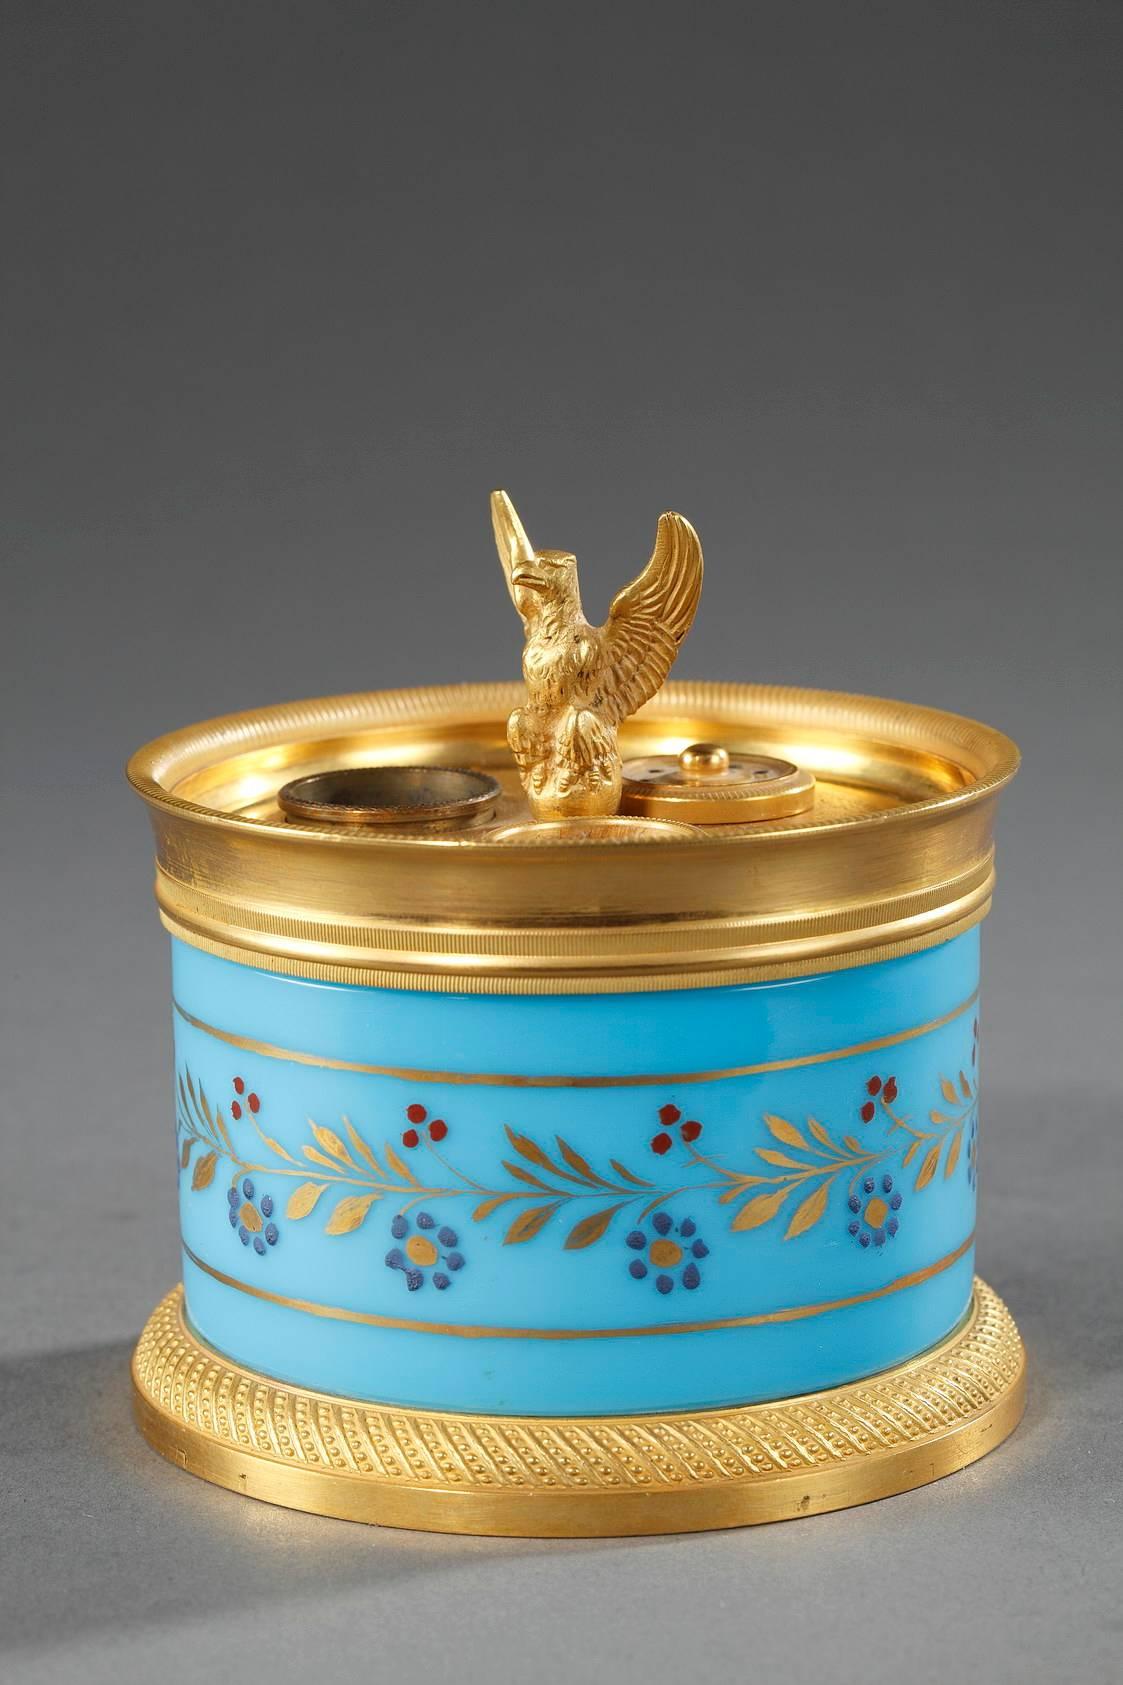 Small, circular inkwell in turquoise opaline with two inkwells and a pounce pot. It is mounted with gilded bronze that is intricately decorated with ribbing and spiraling beadwork. The body of the inkwell is decorated with a ring of gold leaves with